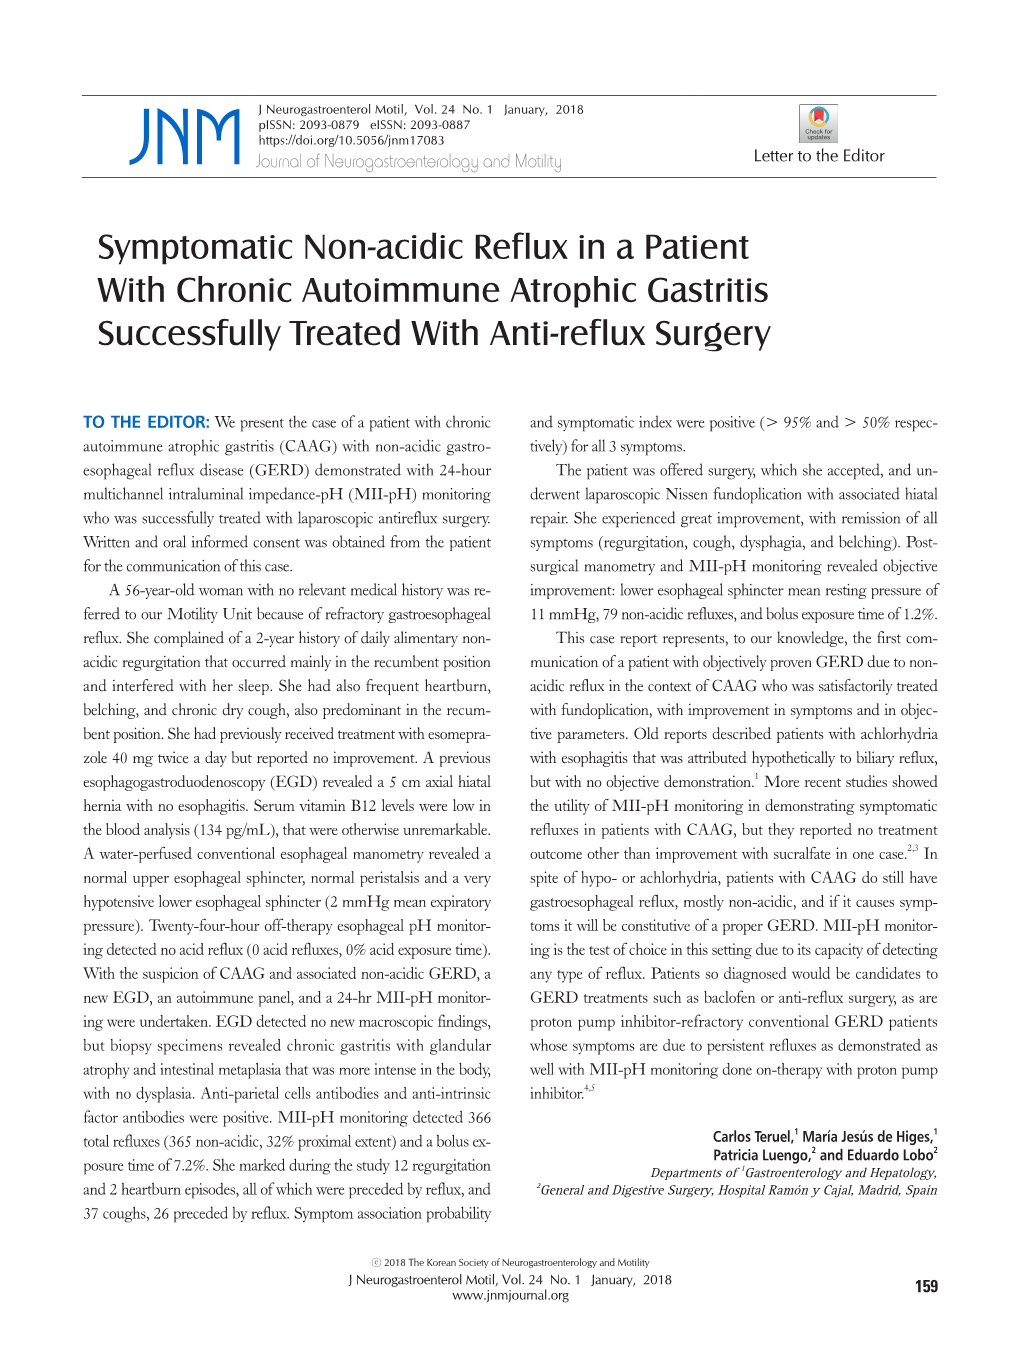 Symptomatic Non-Acidic Reflux in a Patient with Chronic Autoimmune Atrophic Gastritis Successfully Treated with Anti-Reflux Surgery